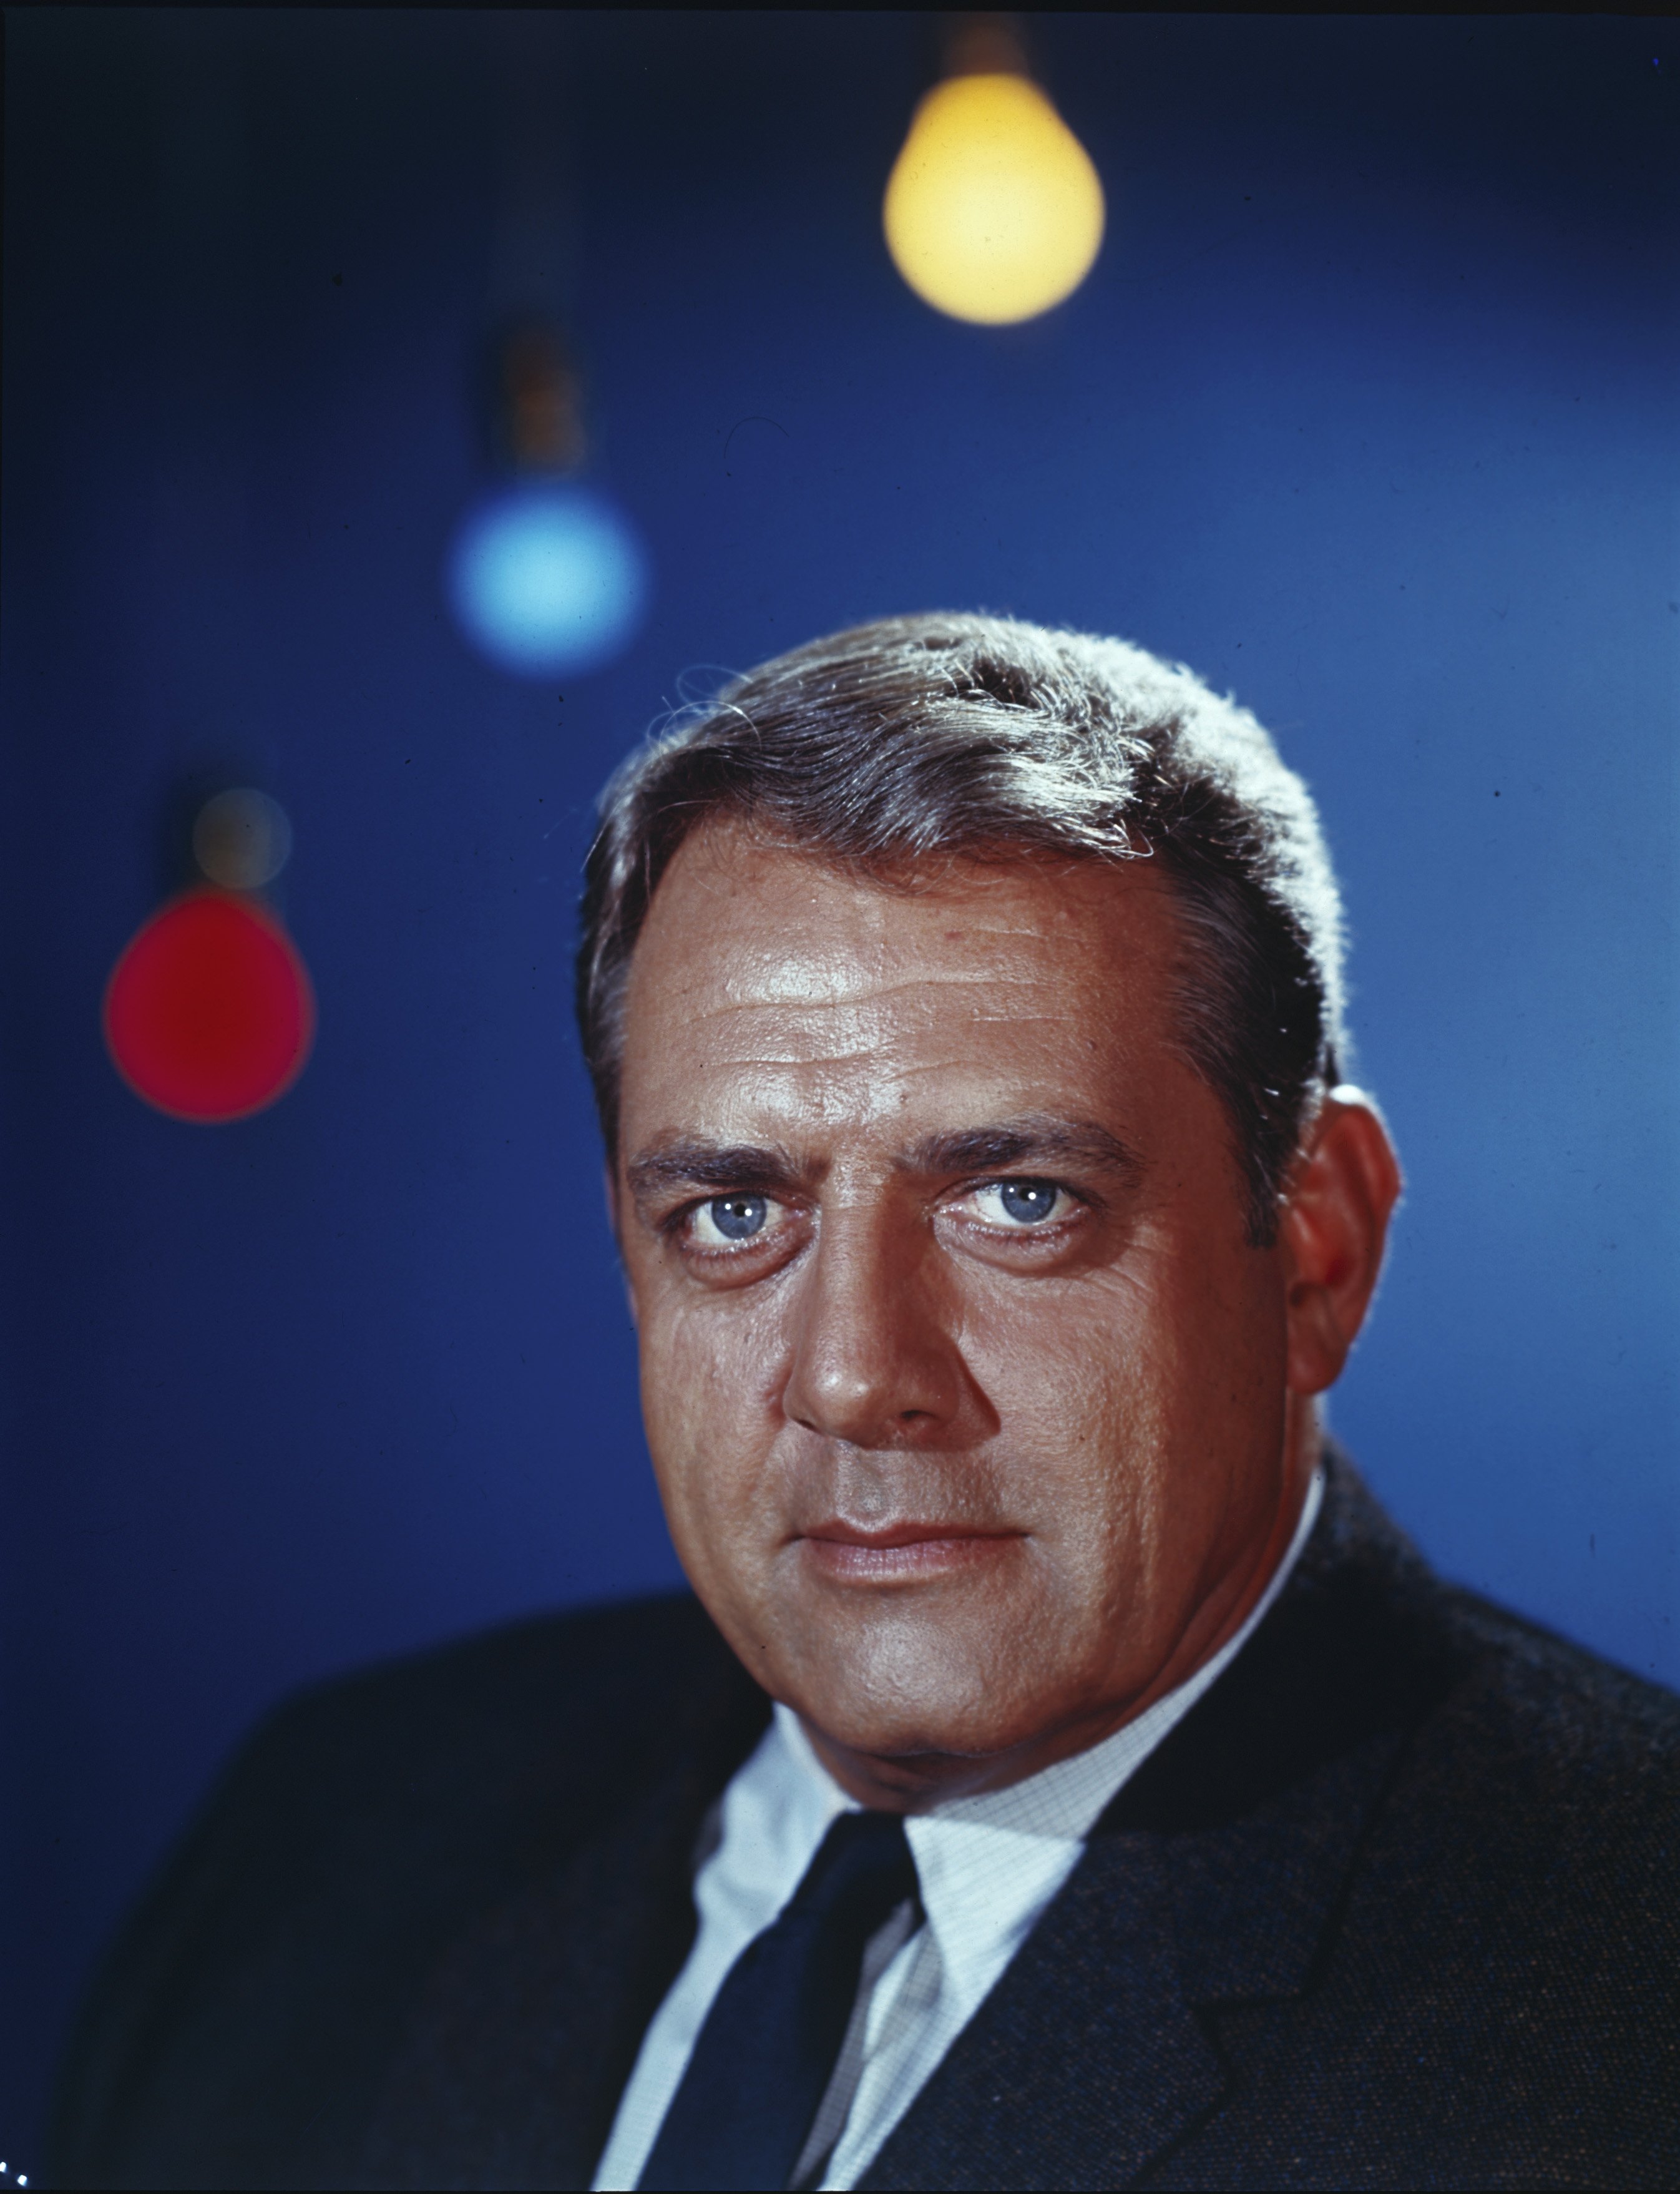 Canadian native Raymond Burr wearing a suit as Robert T. Ironside in the TV series, "Ironside." / Source: Getty Images